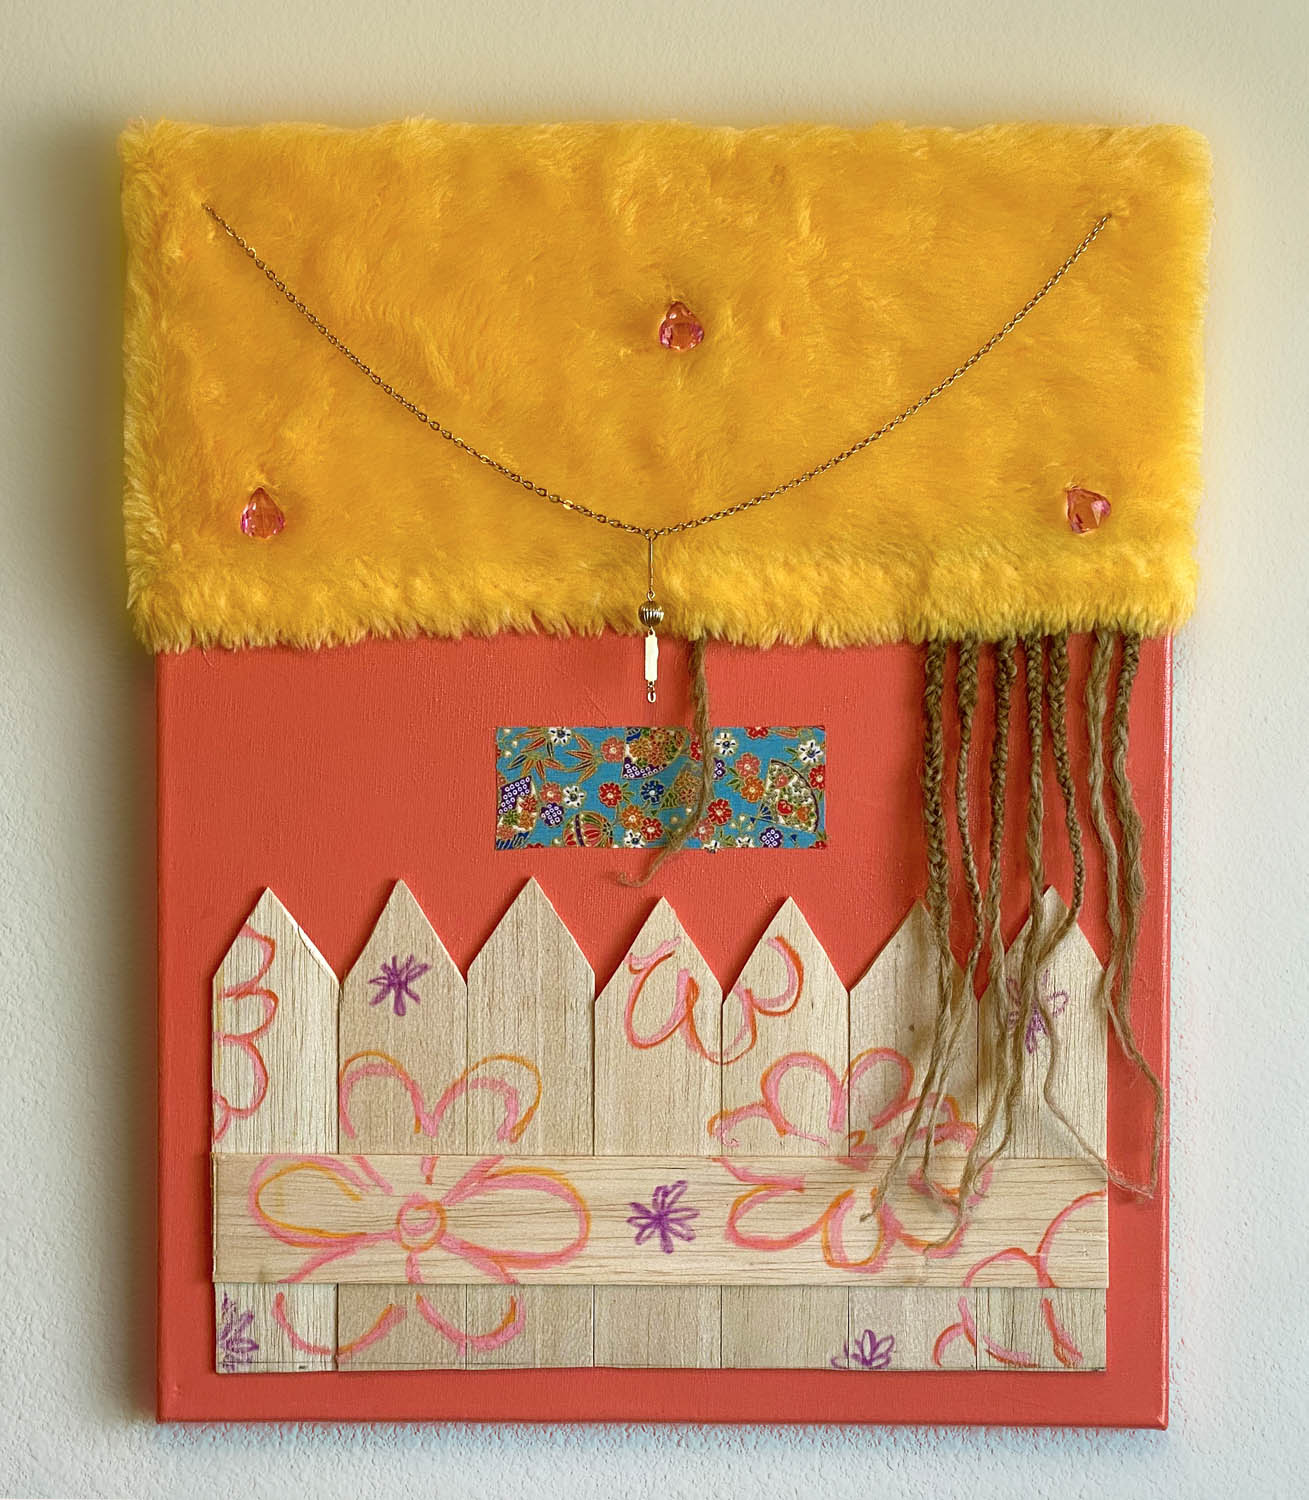 A mixed media piece on a coral colored canvas with fuzzy orange fabric on the top and a wooden fence on bottom that has flowers painted on it. Braided human hair is coming out of the bottom of the fuzzy fabric hanging down over the fence.